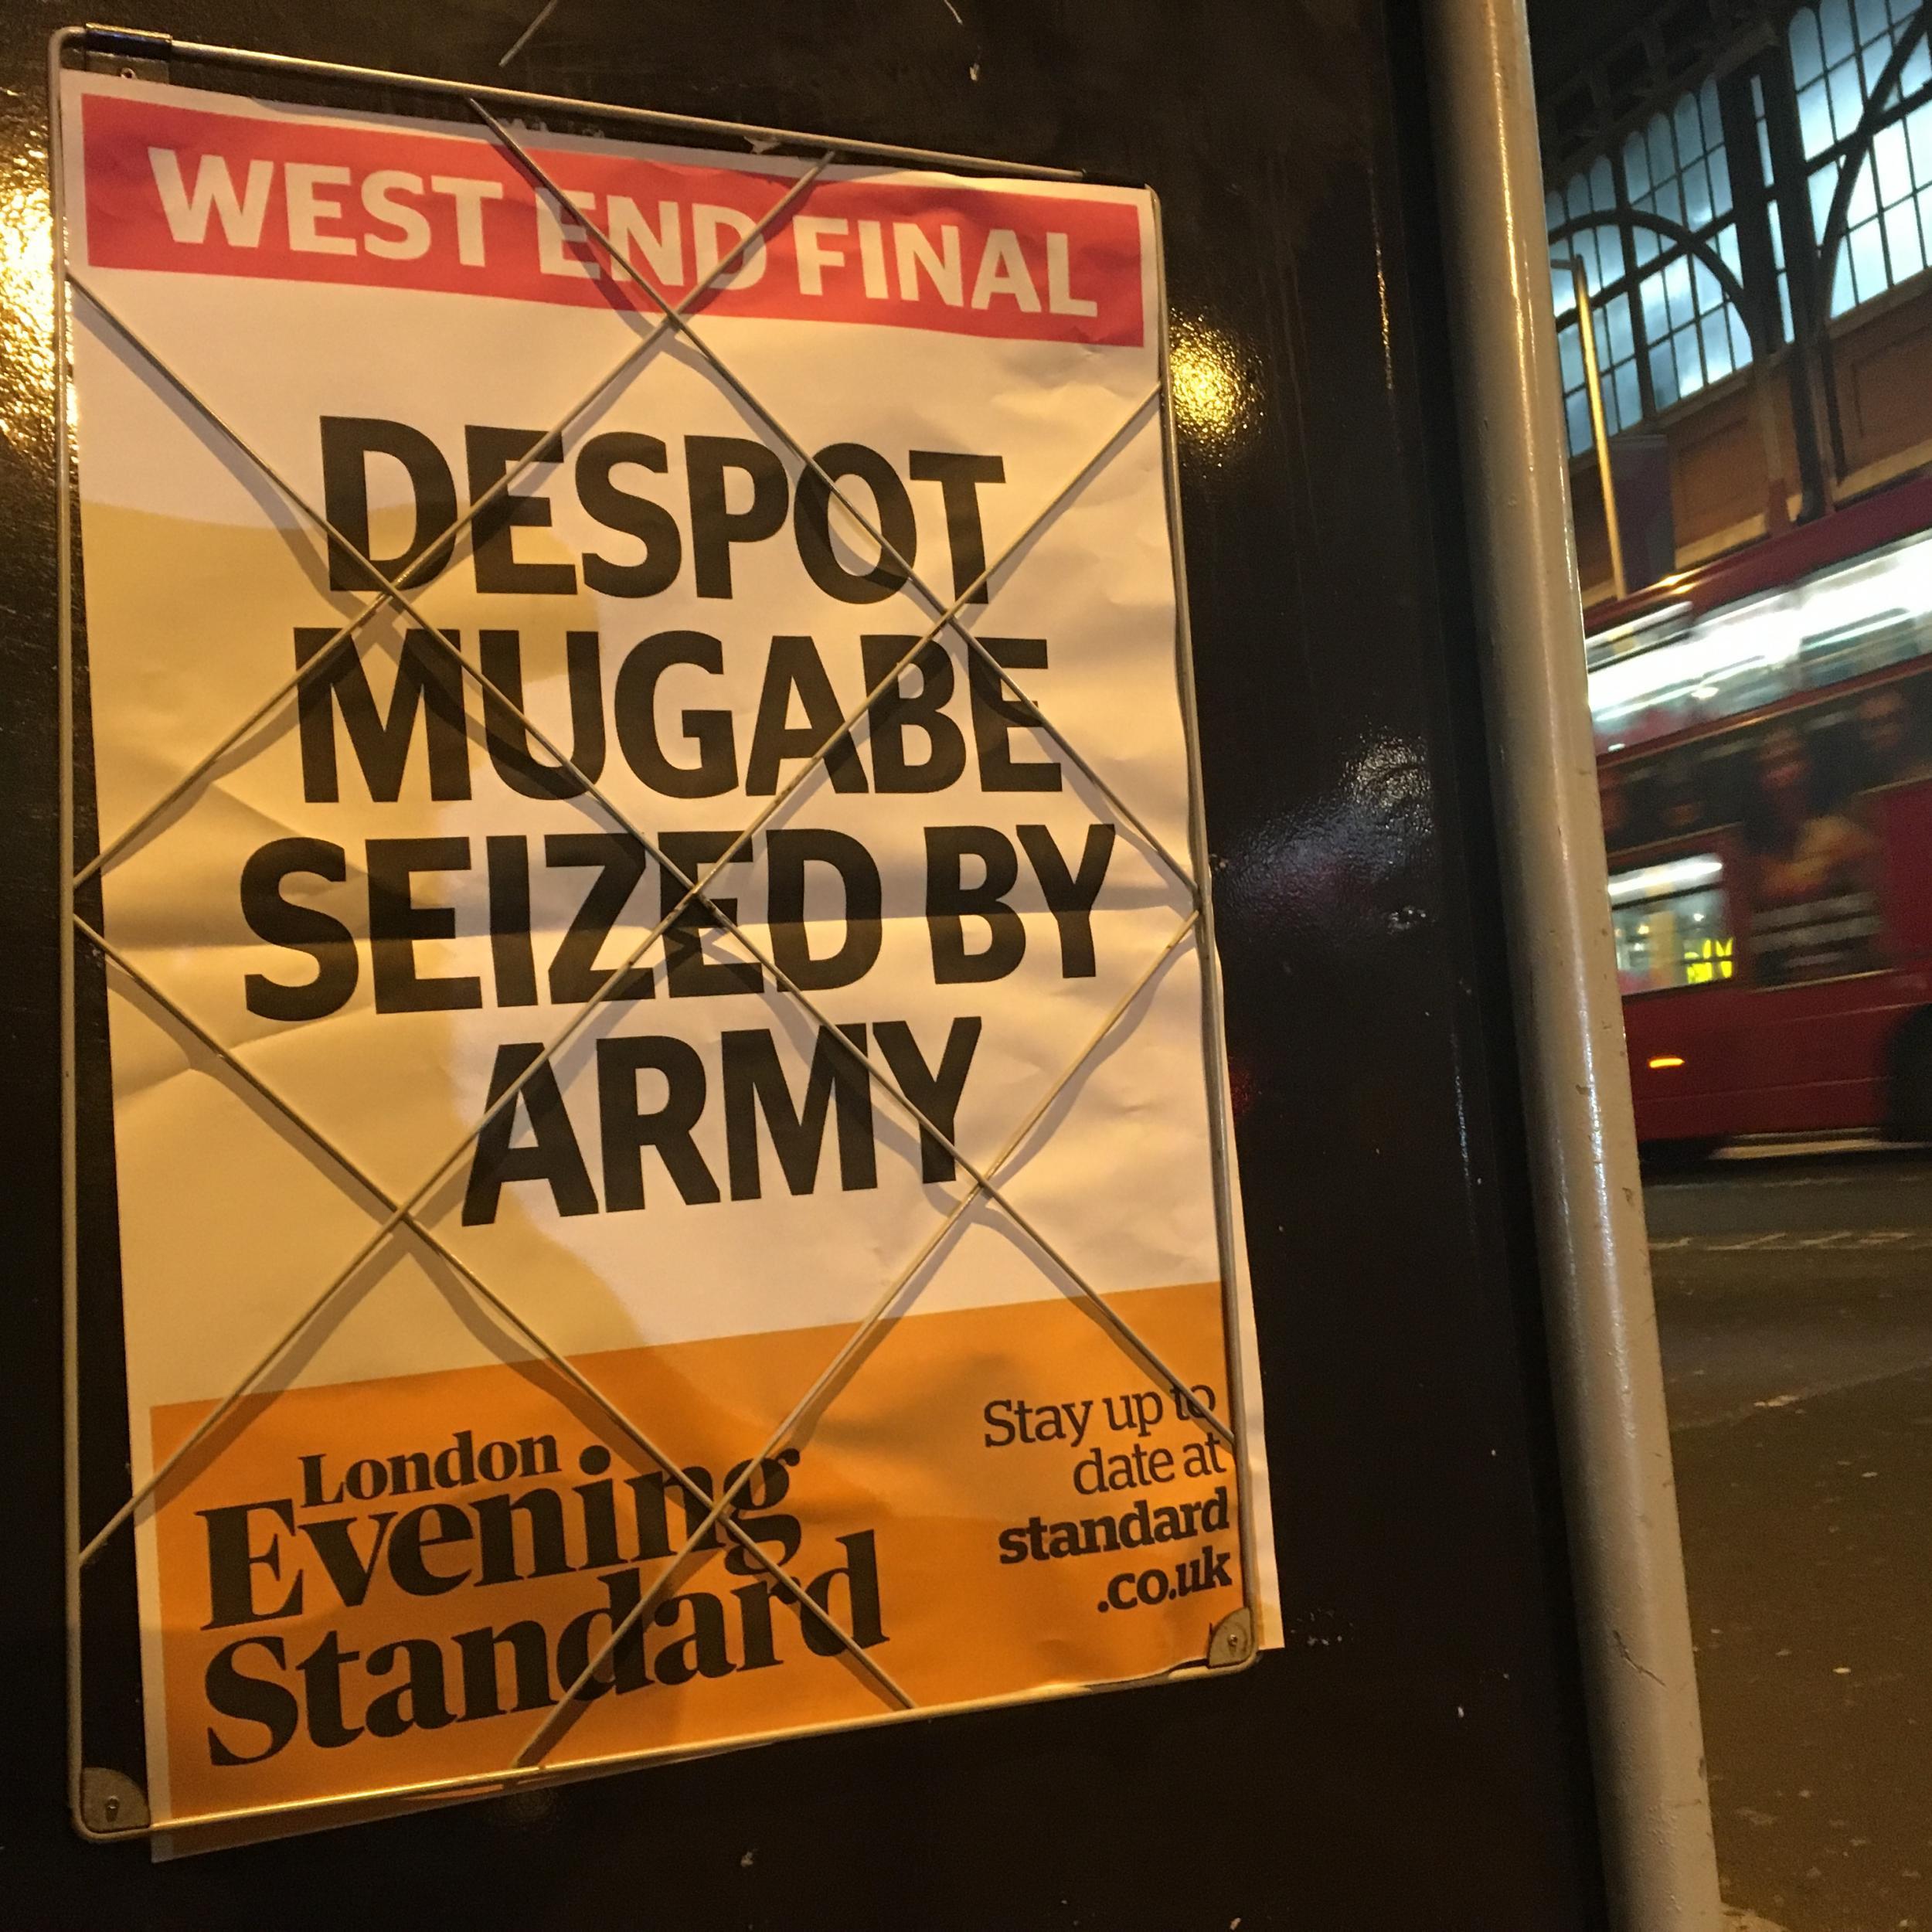 Final notice: the London Evening Standard announces the demise of the Zimbabwean dictator